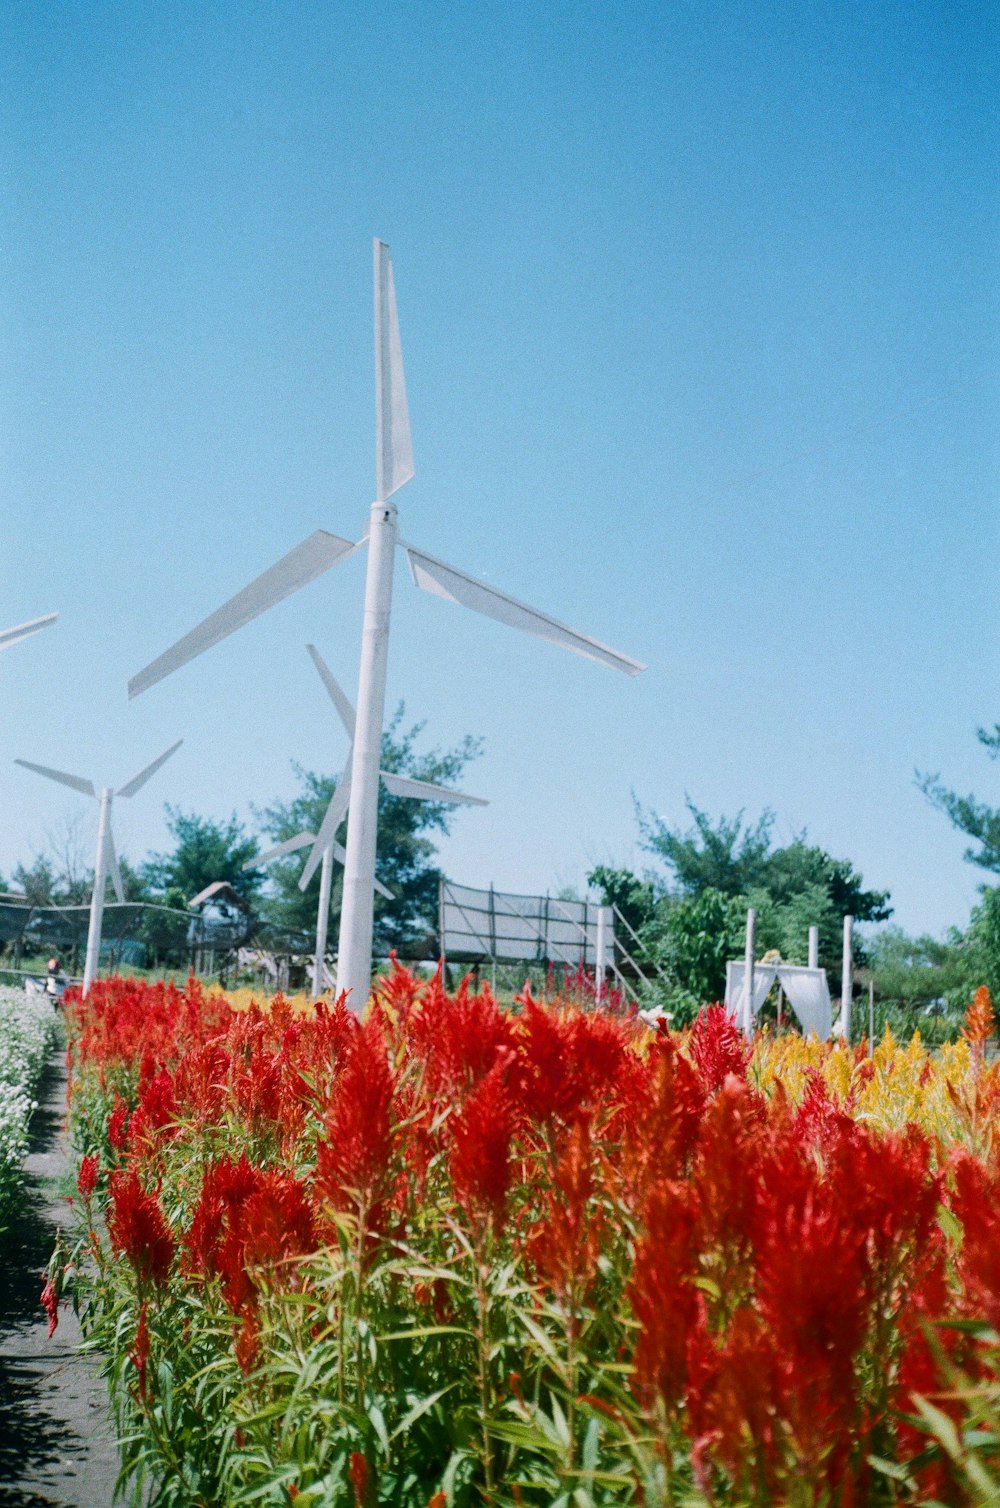 white wind turbine on red and yellow flower field under blue sky during daytime